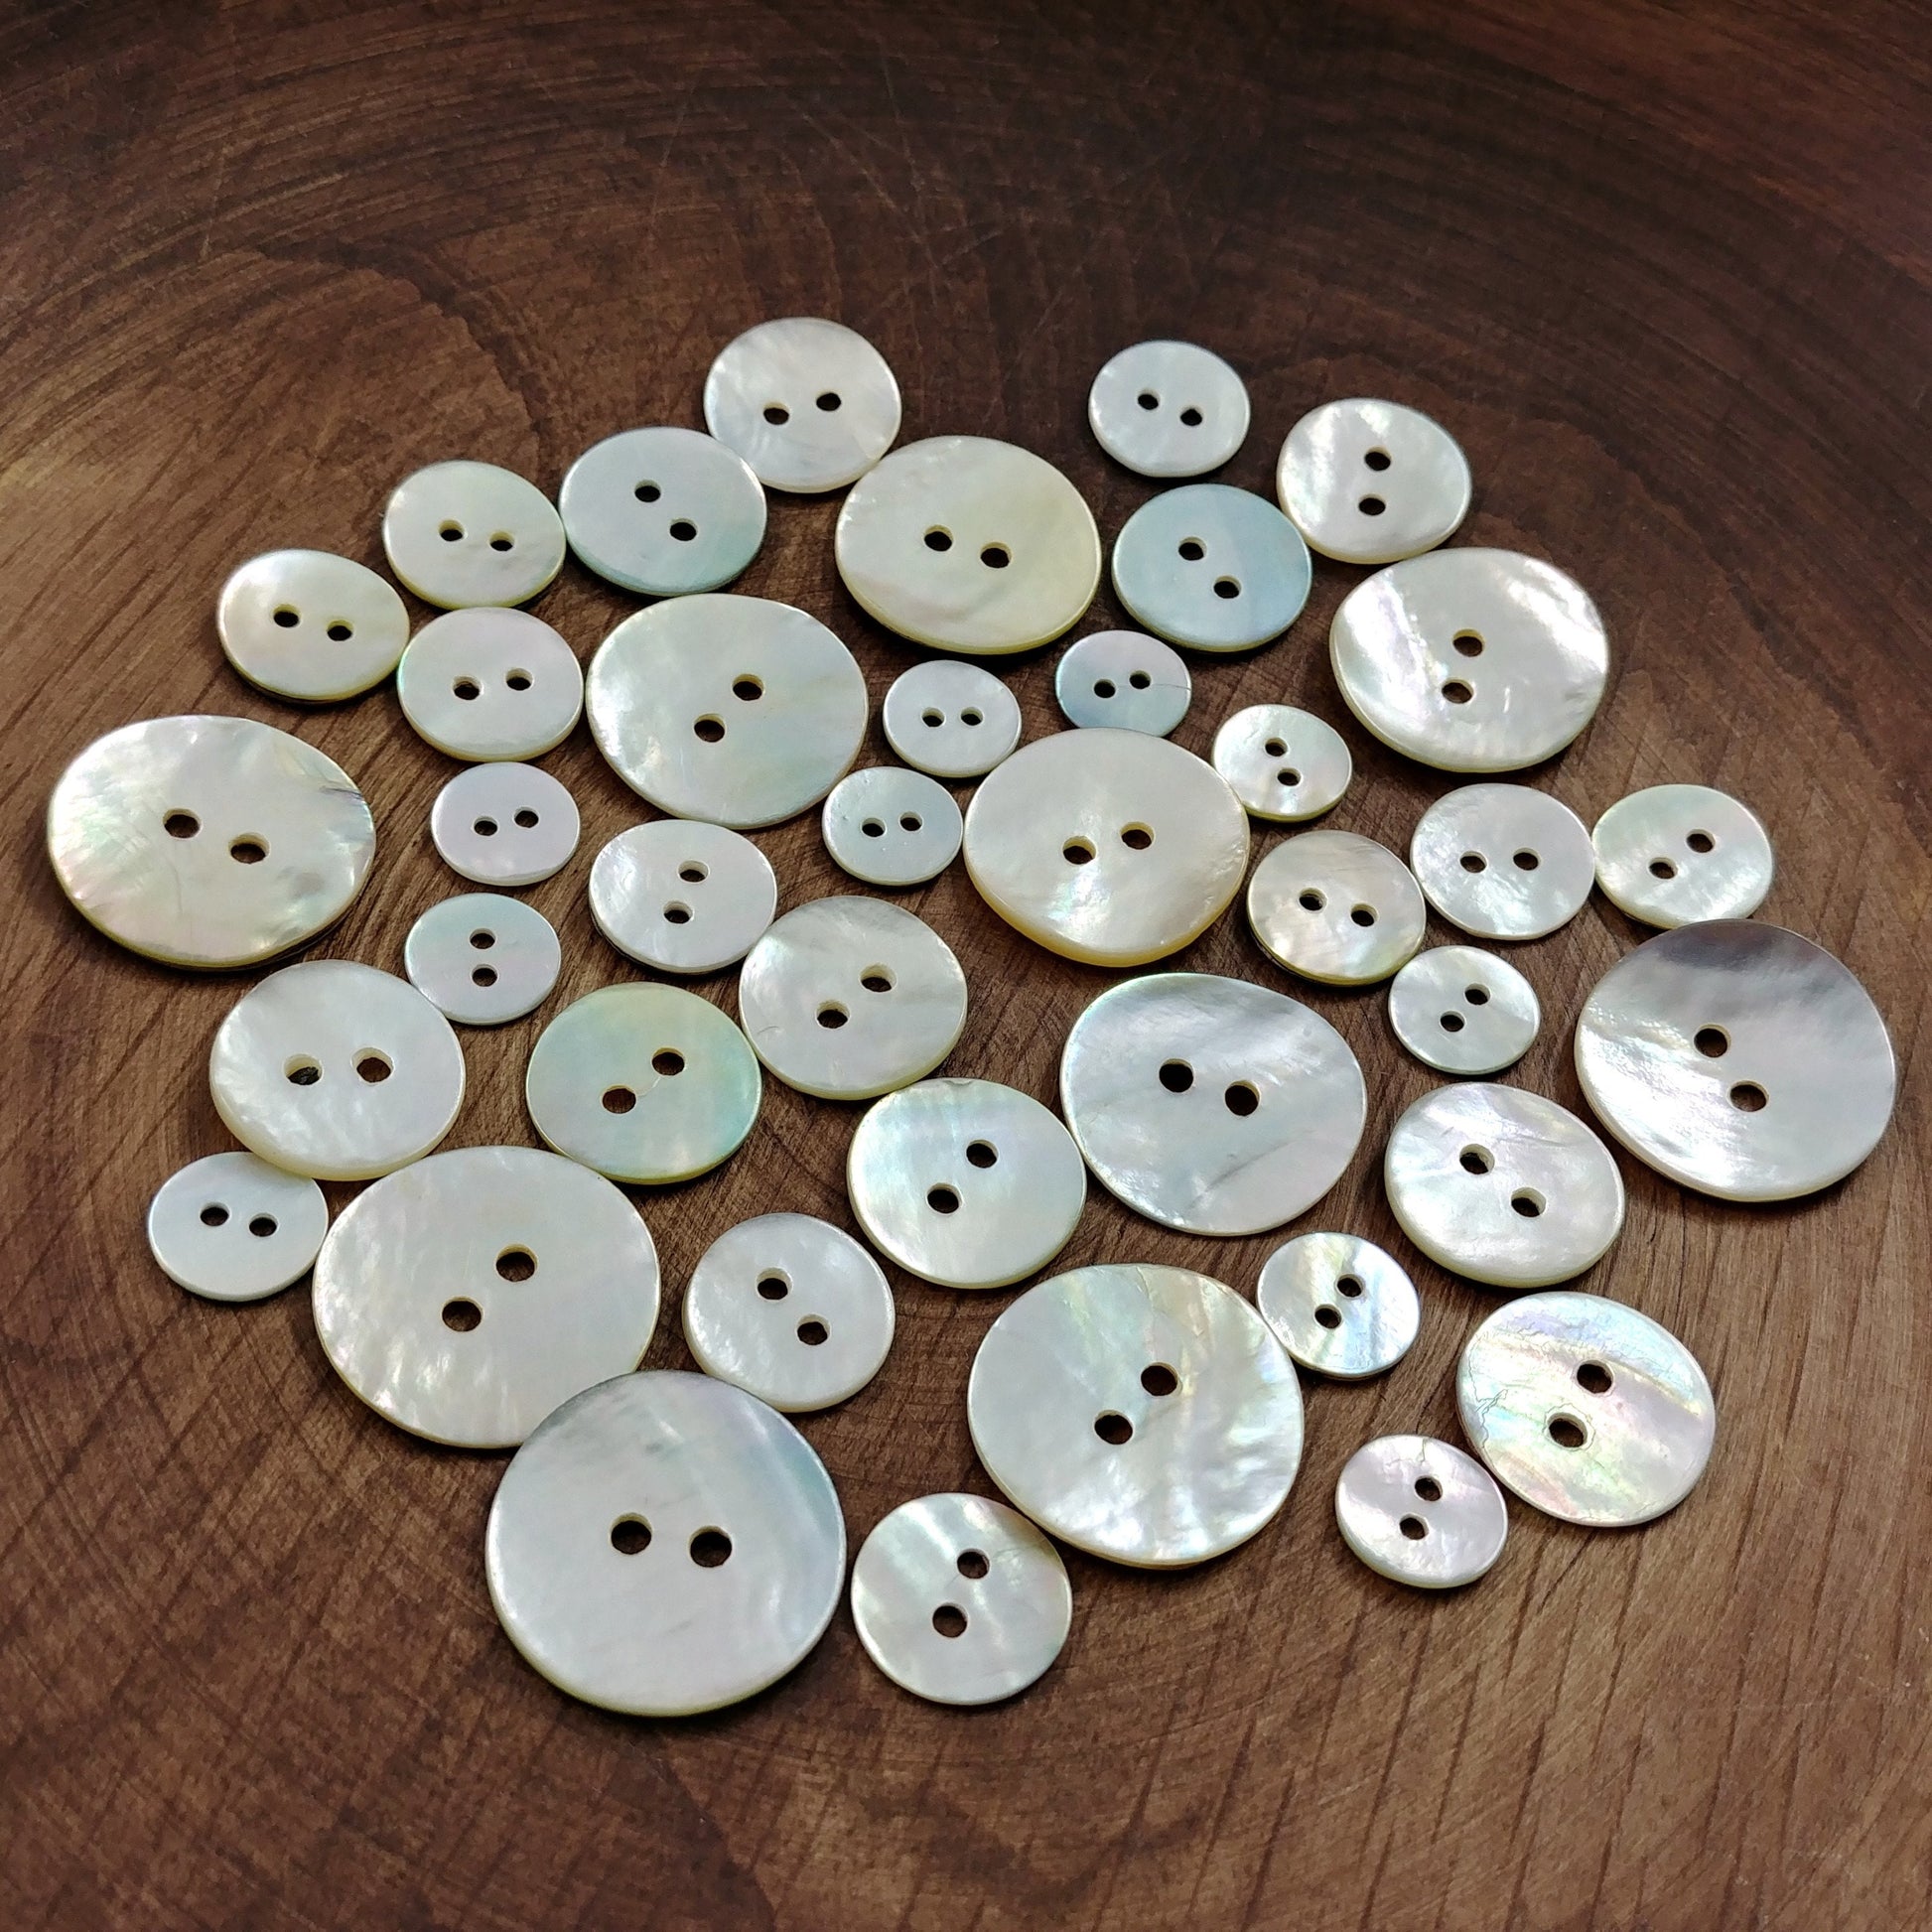 Natural agoya shell buttons, 4 sizes available, Raw pearl sewing buttons